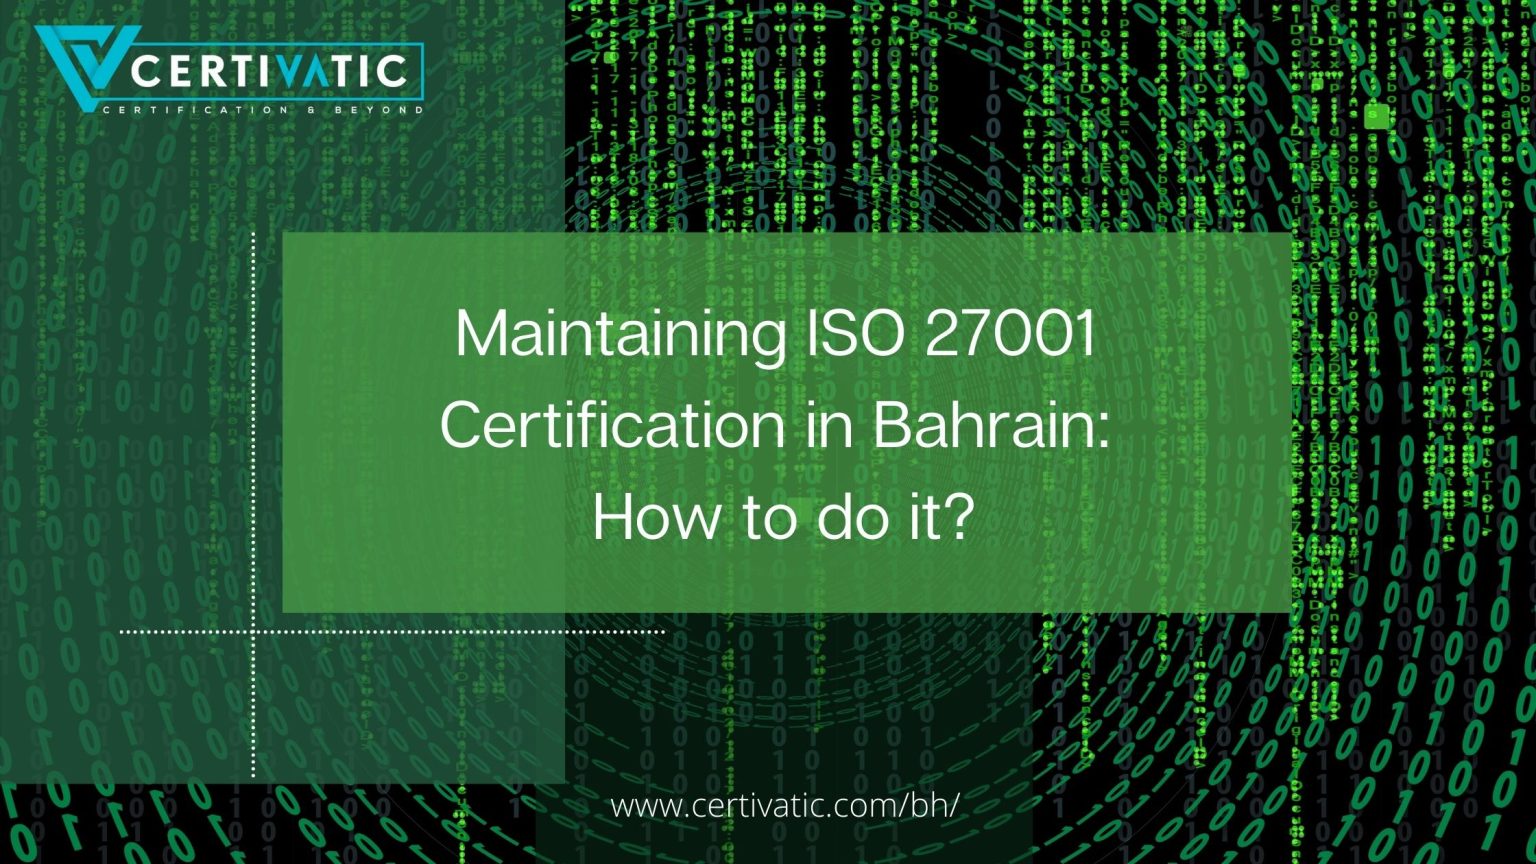 Maintaining ISO 27001 certification in Bahrain: How to do it?